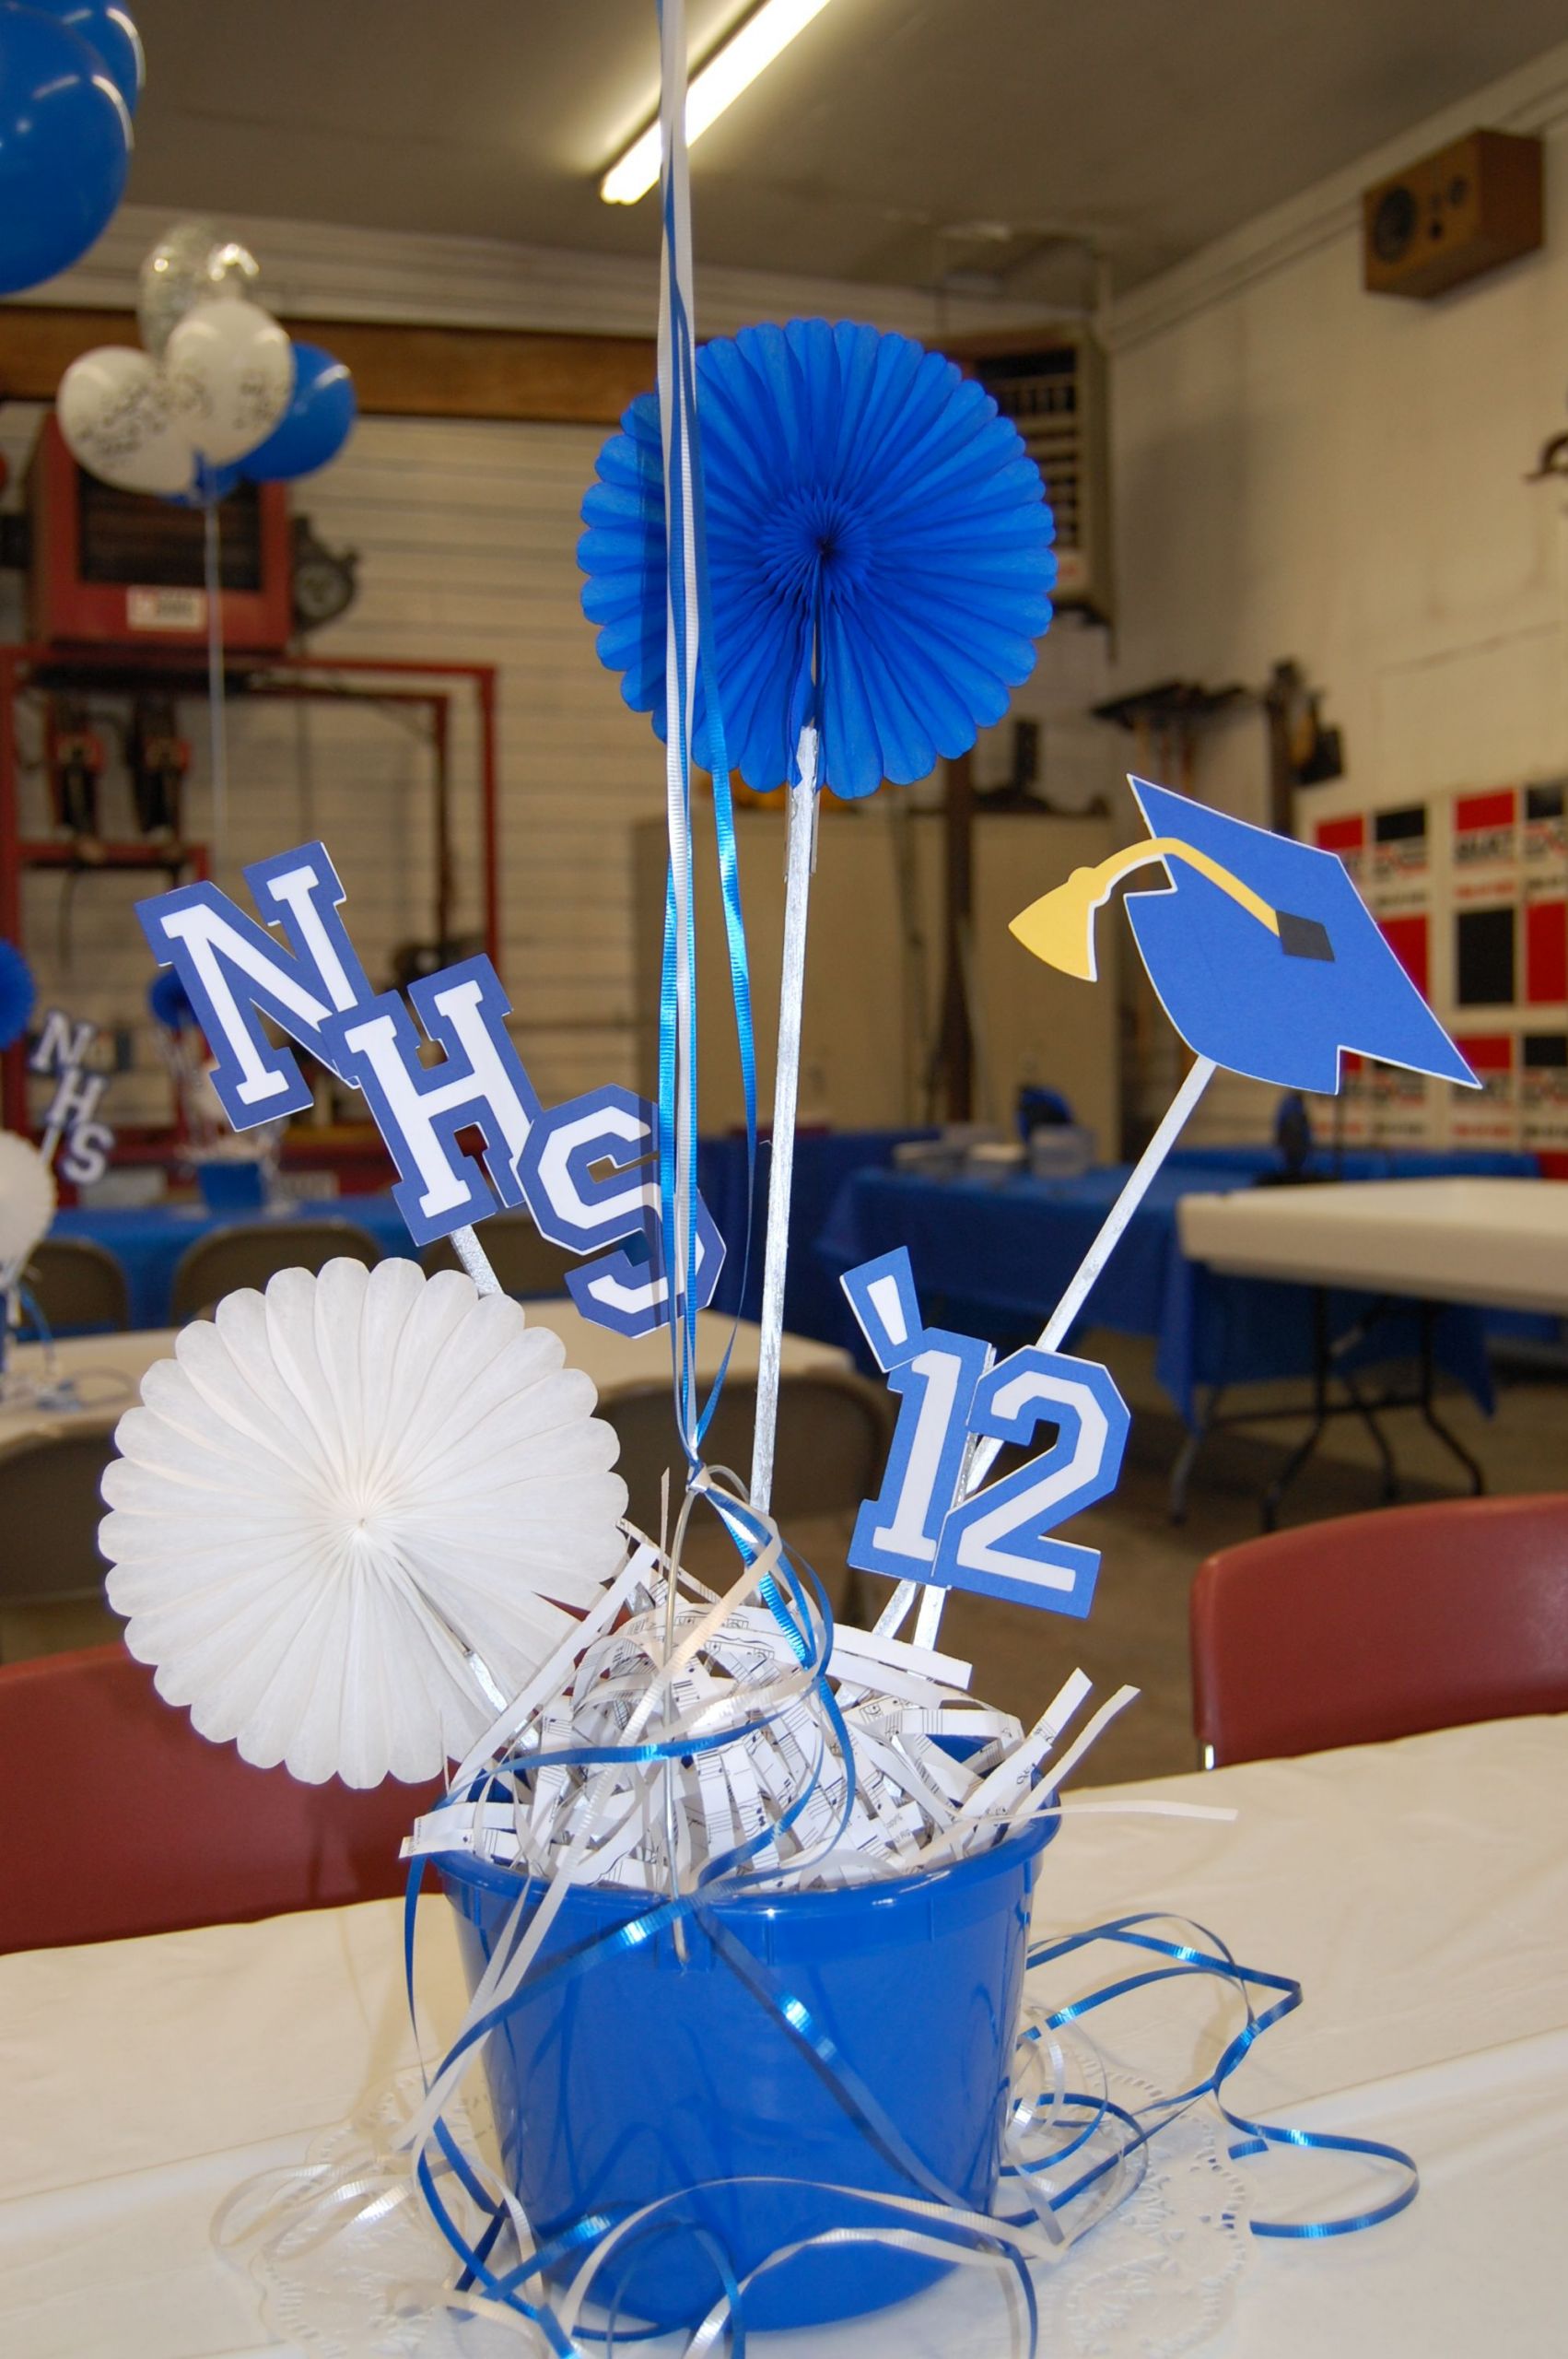 Centerpieces Ideas For Graduation Party
 Easy centerpieces Grad time will be here soon